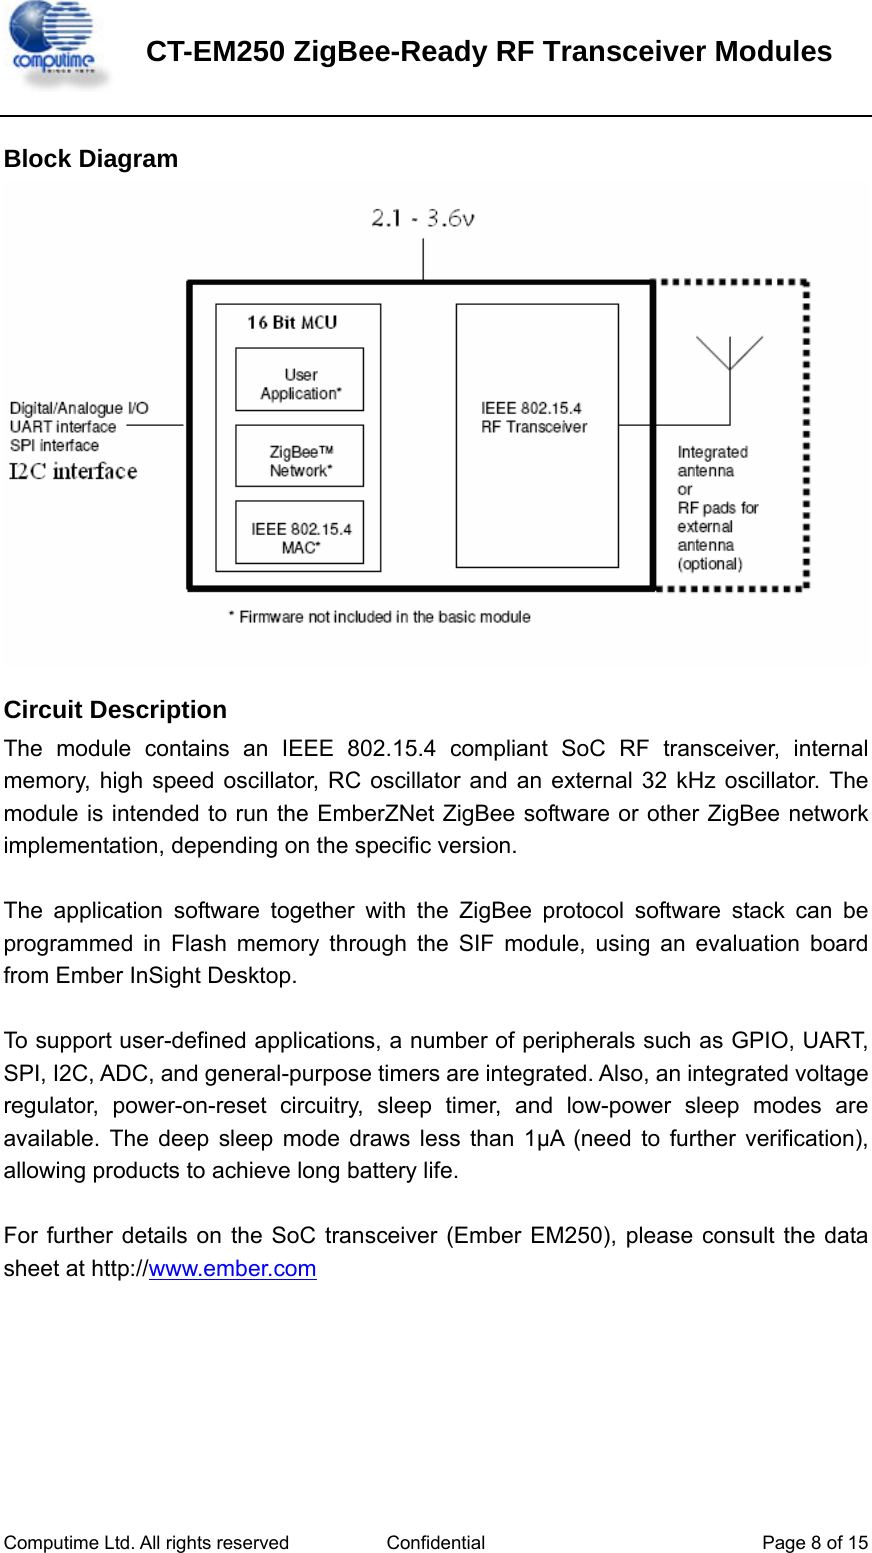    CT-EM250 ZigBee-Ready RF Transceiver Modules   Computime Ltd. All rights reserved  Confidential  Page 8 of 15   Block Diagram  Circuit Description The module contains an IEEE 802.15.4 compliant SoC RF transceiver, internal memory, high speed oscillator, RC oscillator and an external 32 kHz oscillator. The module is intended to run the EmberZNet ZigBee software or other ZigBee network implementation, depending on the specific version.  The application software together with the ZigBee protocol software stack can be programmed in Flash memory through the SIF module, using an evaluation board from Ember InSight Desktop.  To support user-defined applications, a number of peripherals such as GPIO, UART, SPI, I2C, ADC, and general-purpose timers are integrated. Also, an integrated voltage regulator, power-on-reset circuitry, sleep timer, and low-power sleep modes are available. The deep sleep mode draws less than 1μA (need to further verification), allowing products to achieve long battery life.  For further details on the SoC transceiver (Ember EM250), please consult the data sheet at http://www.ember.com     